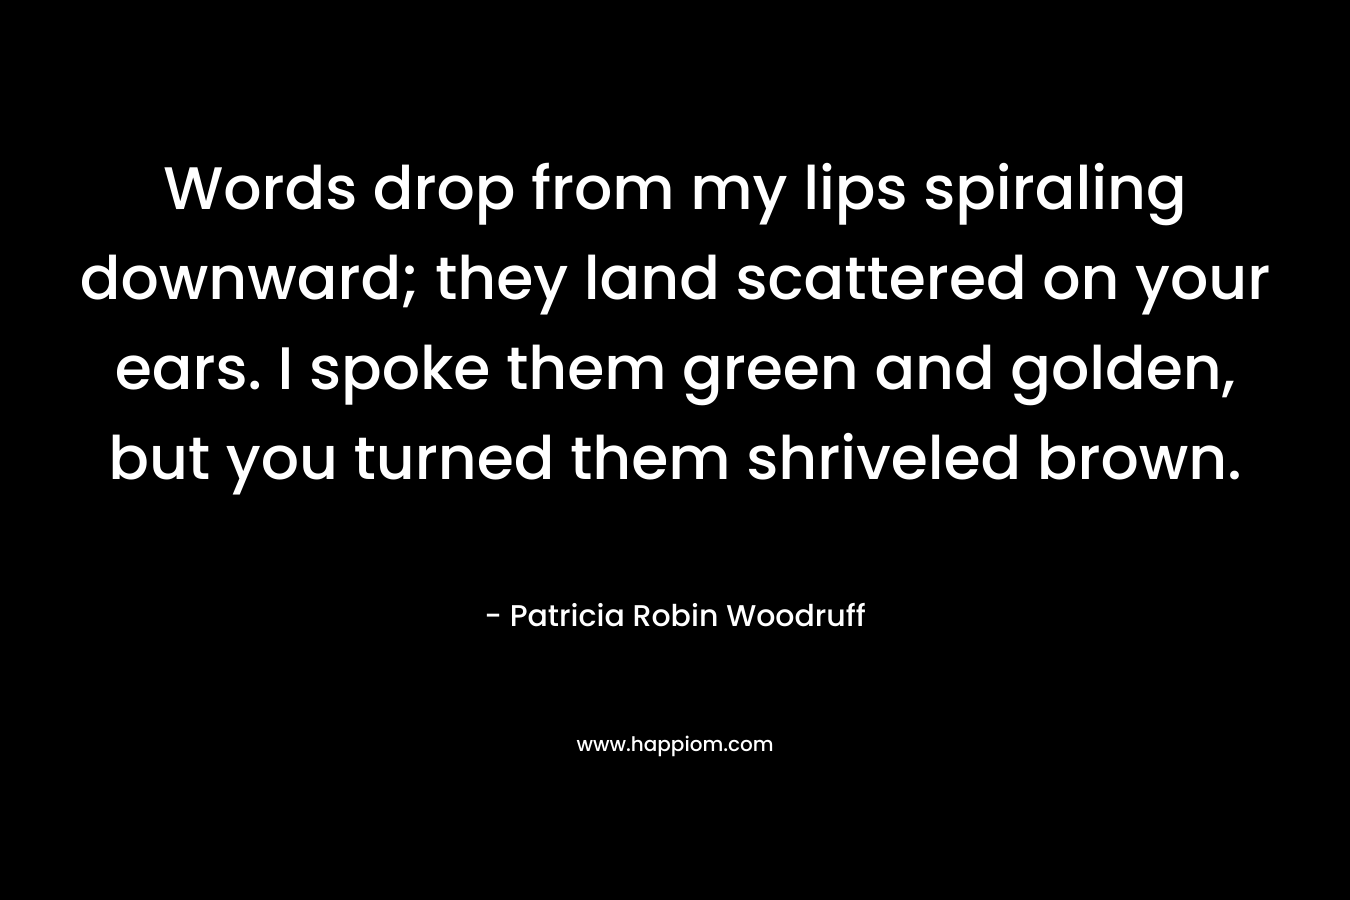 Words drop from my lips spiraling downward; they land scattered on your ears. I spoke them green and golden, but you turned them shriveled brown. – Patricia Robin Woodruff